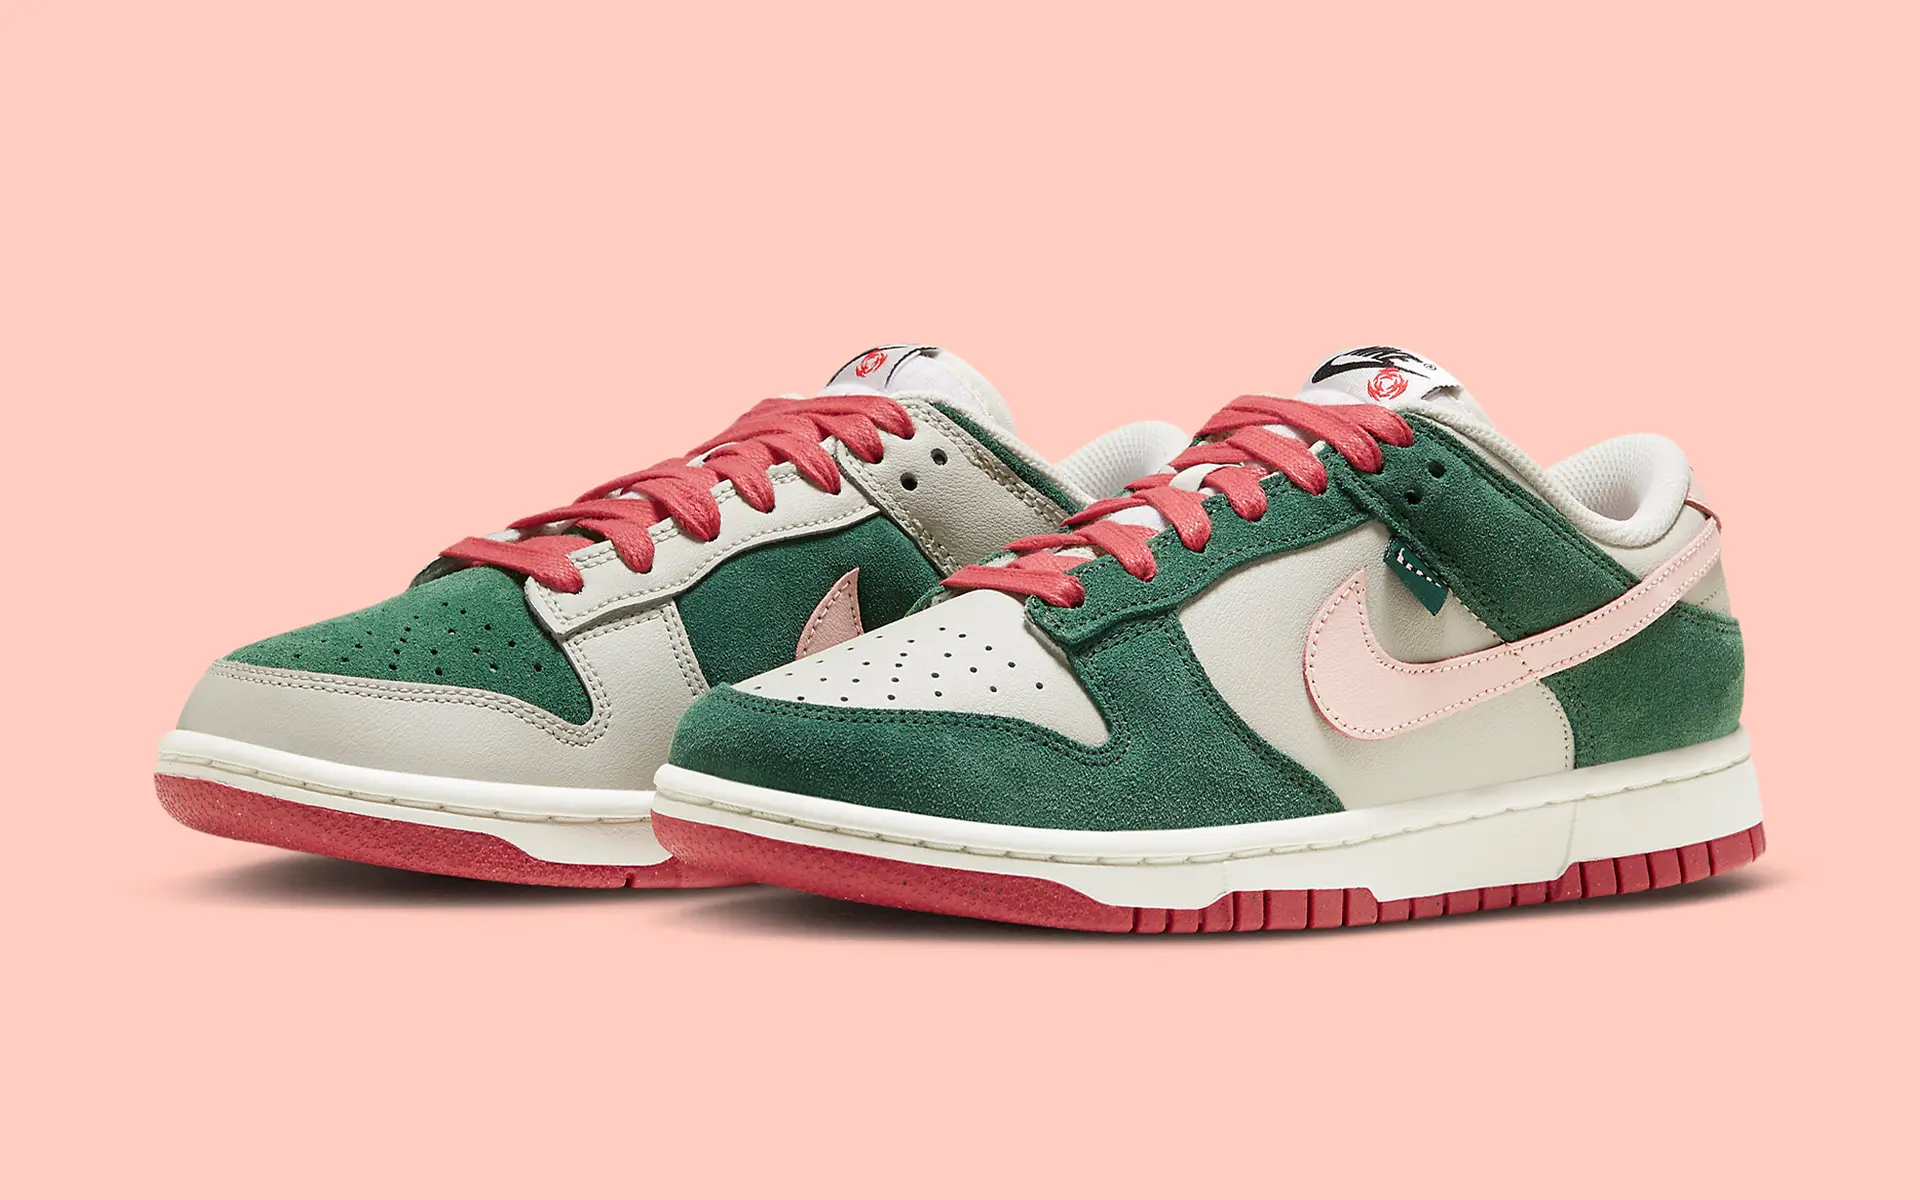 Nike Dunk Low “All Petals United” Releasing Soon